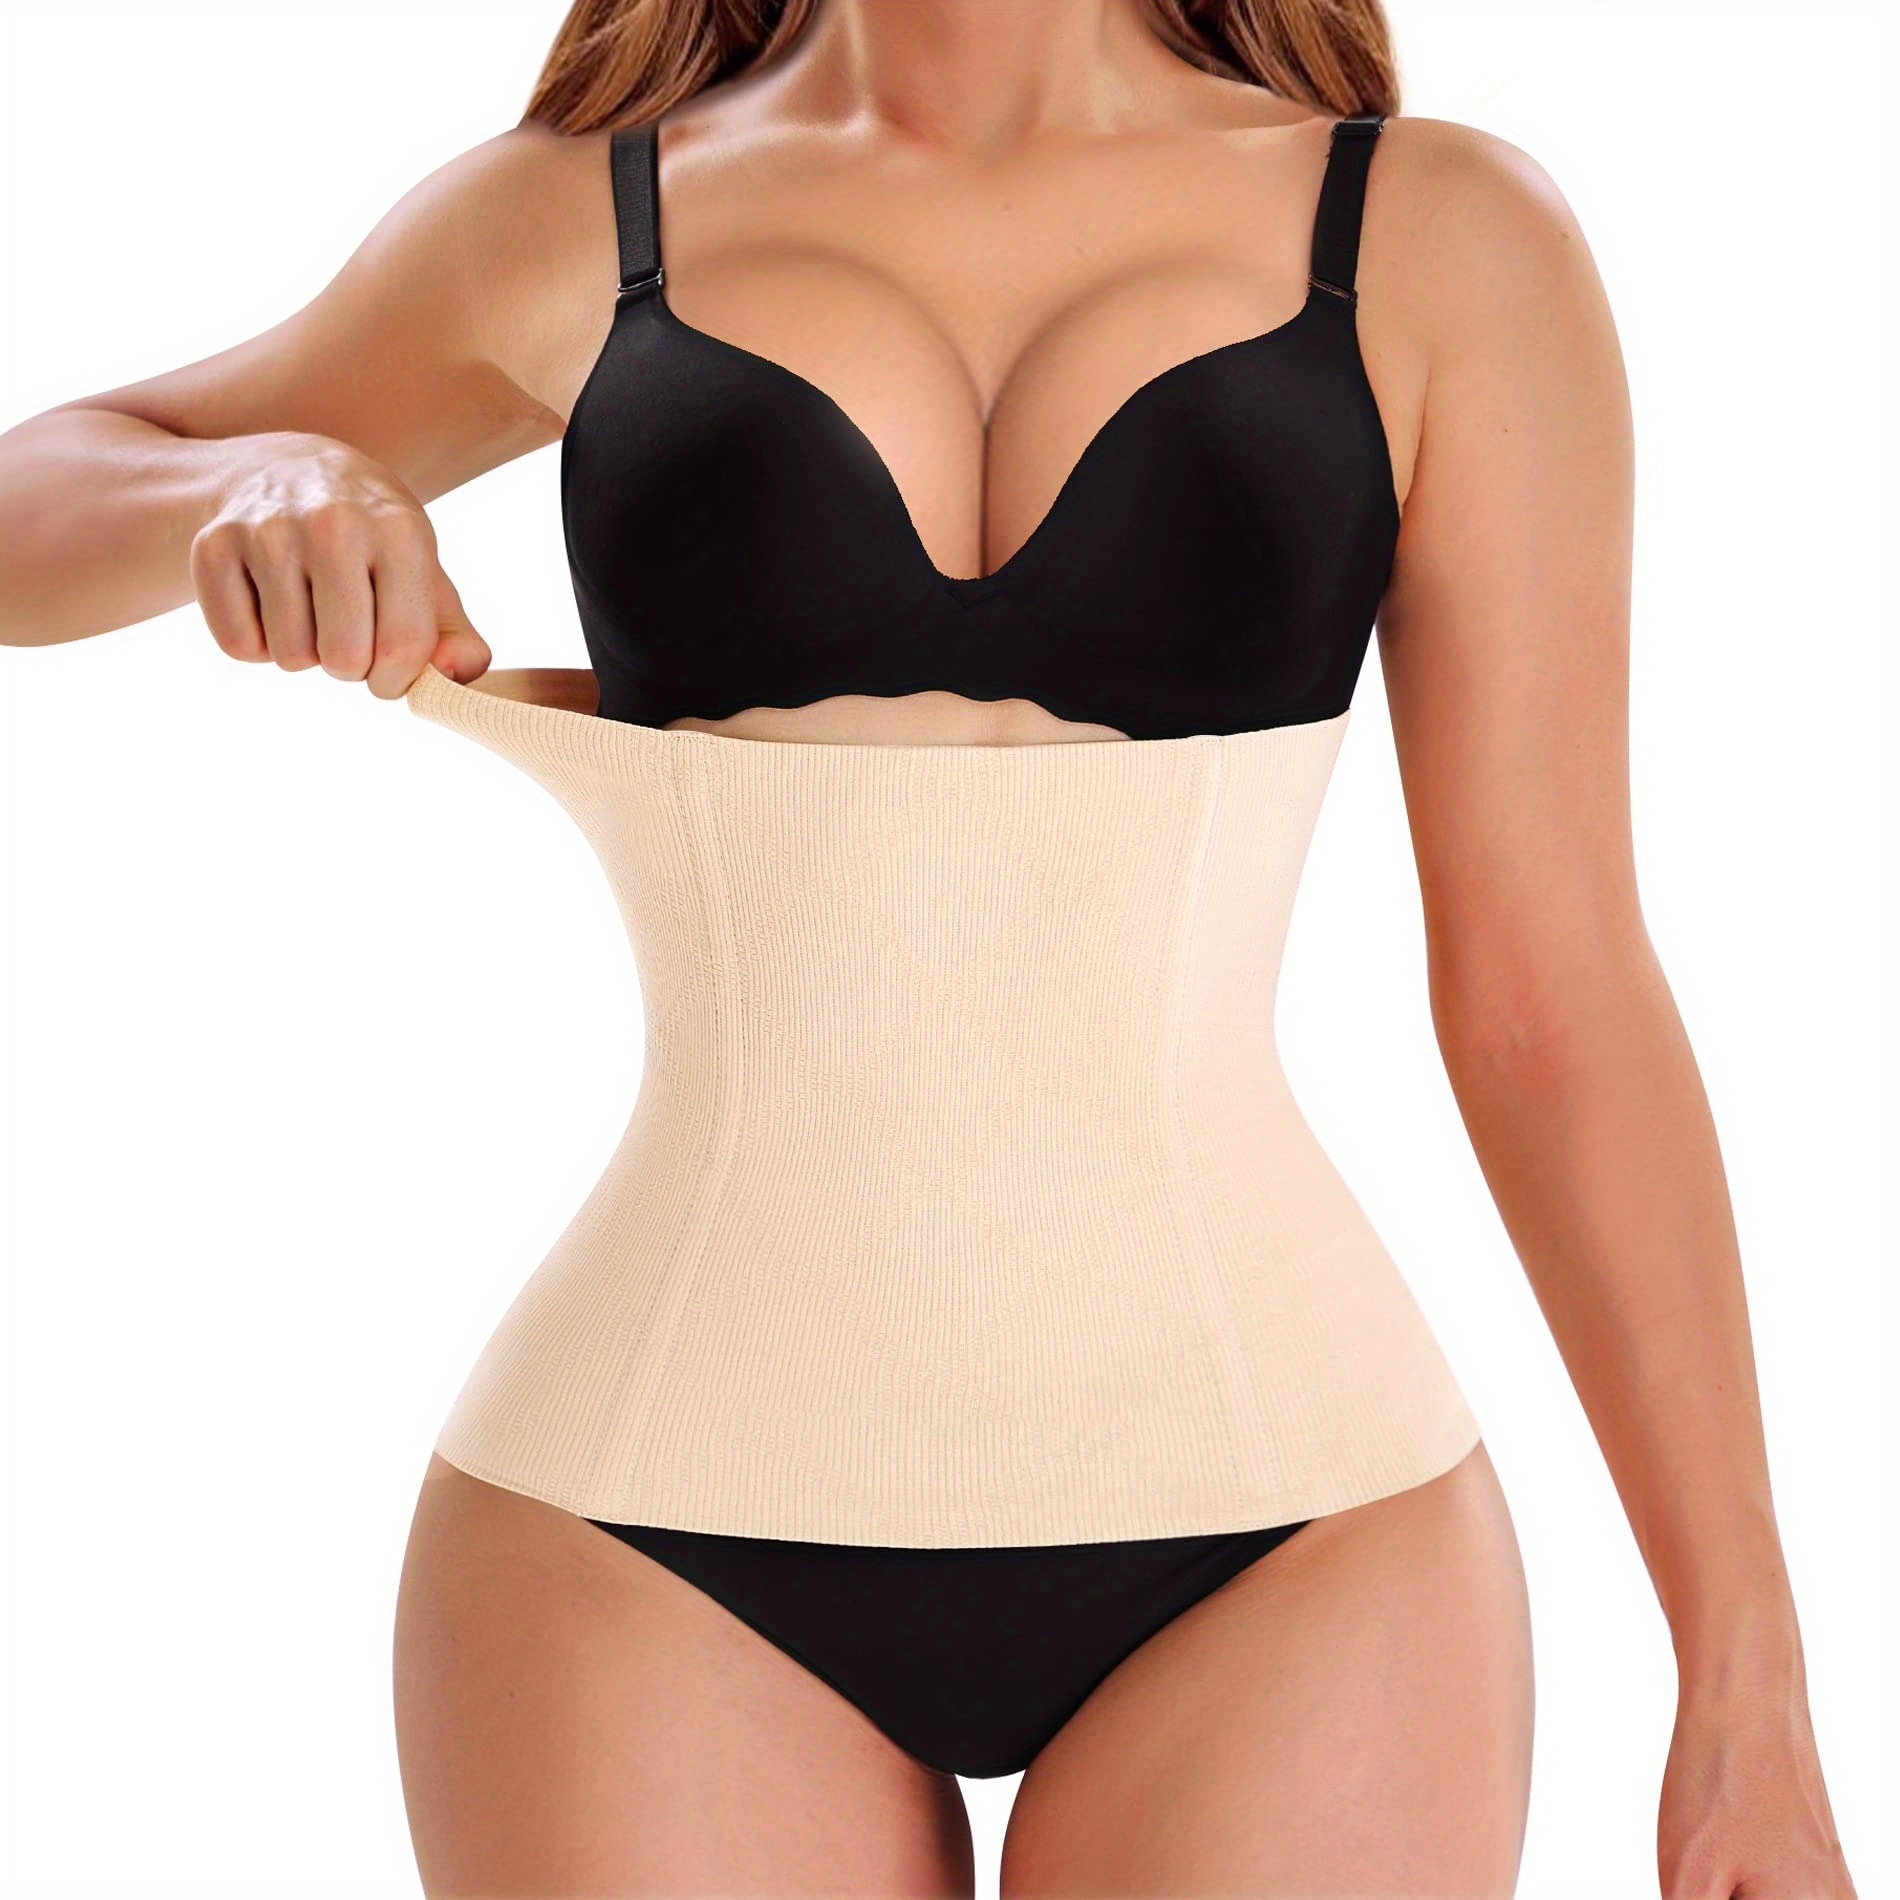 Up To 80% Off on Waist Trainer for Women Snatc